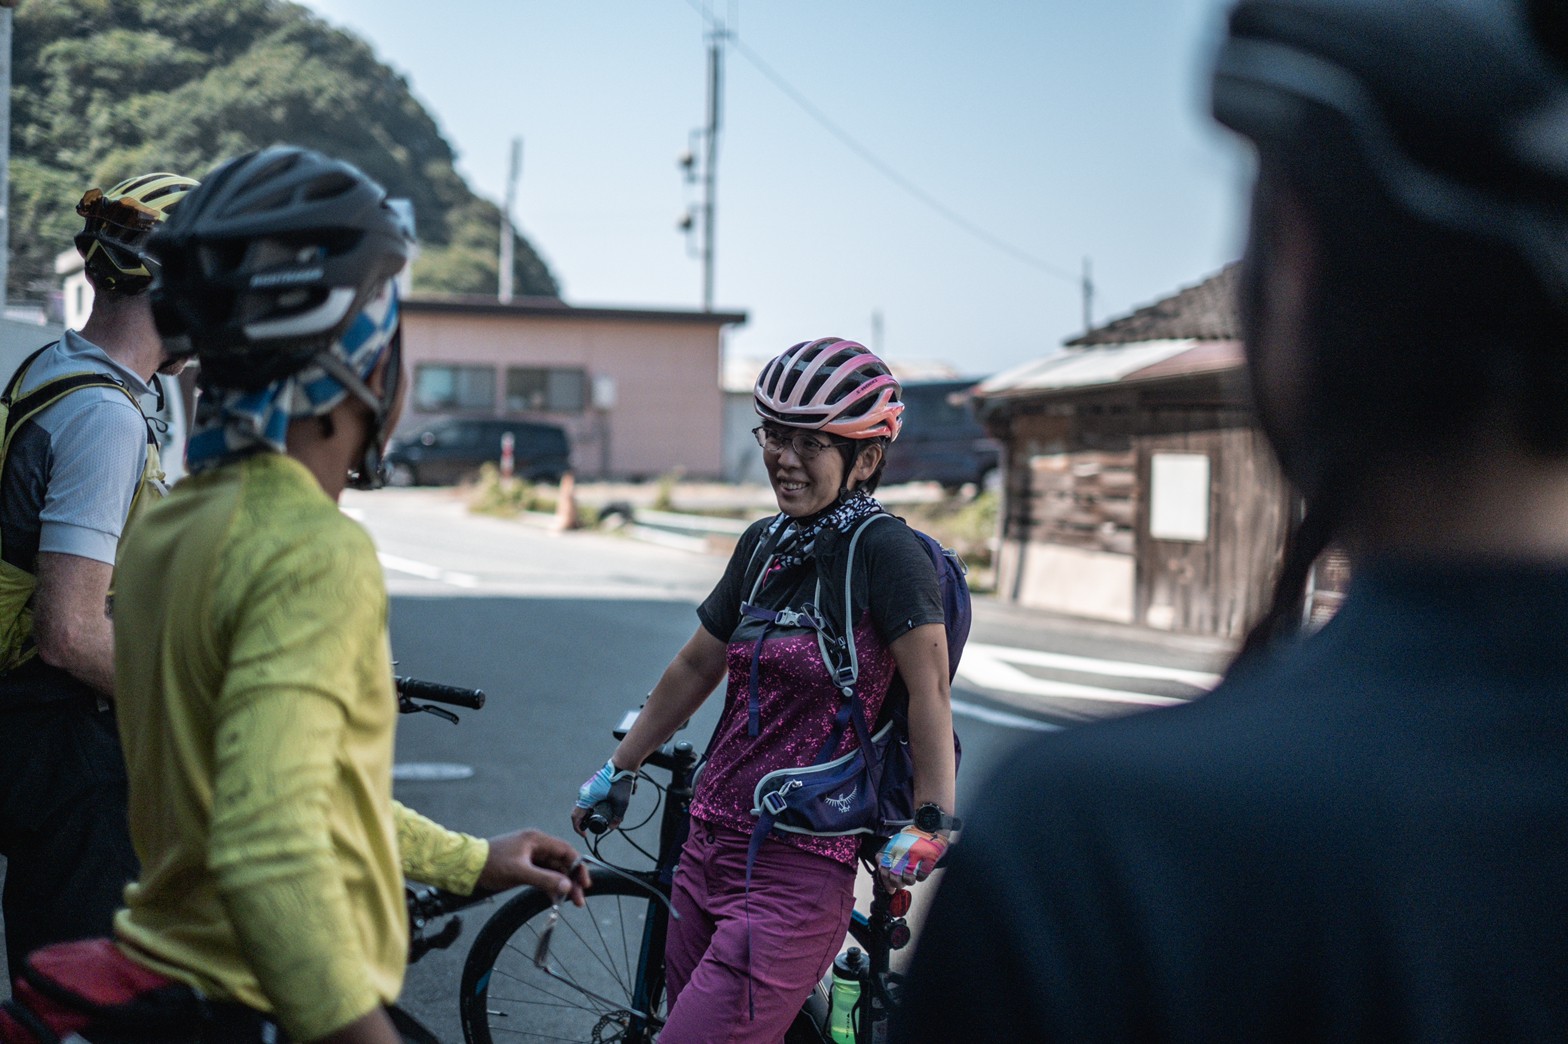 Local guides on our bike tours in Japan